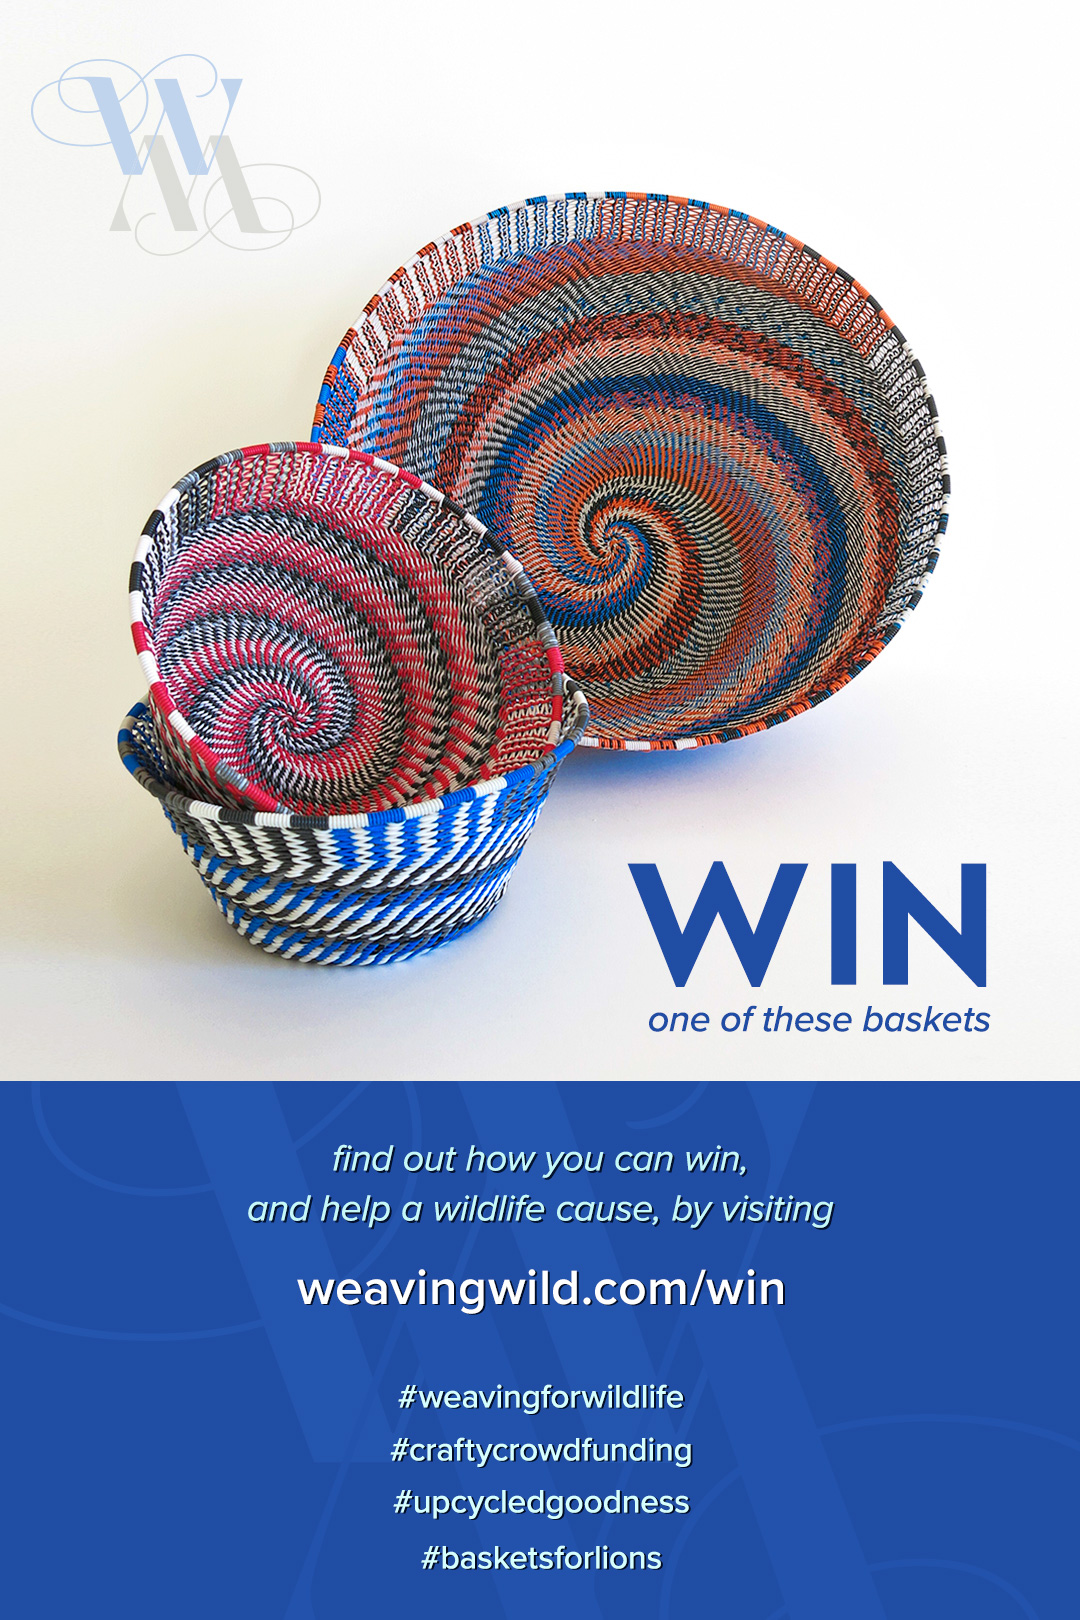 Pin this image. Find out how you can win a basket while helping a wildlife cause.